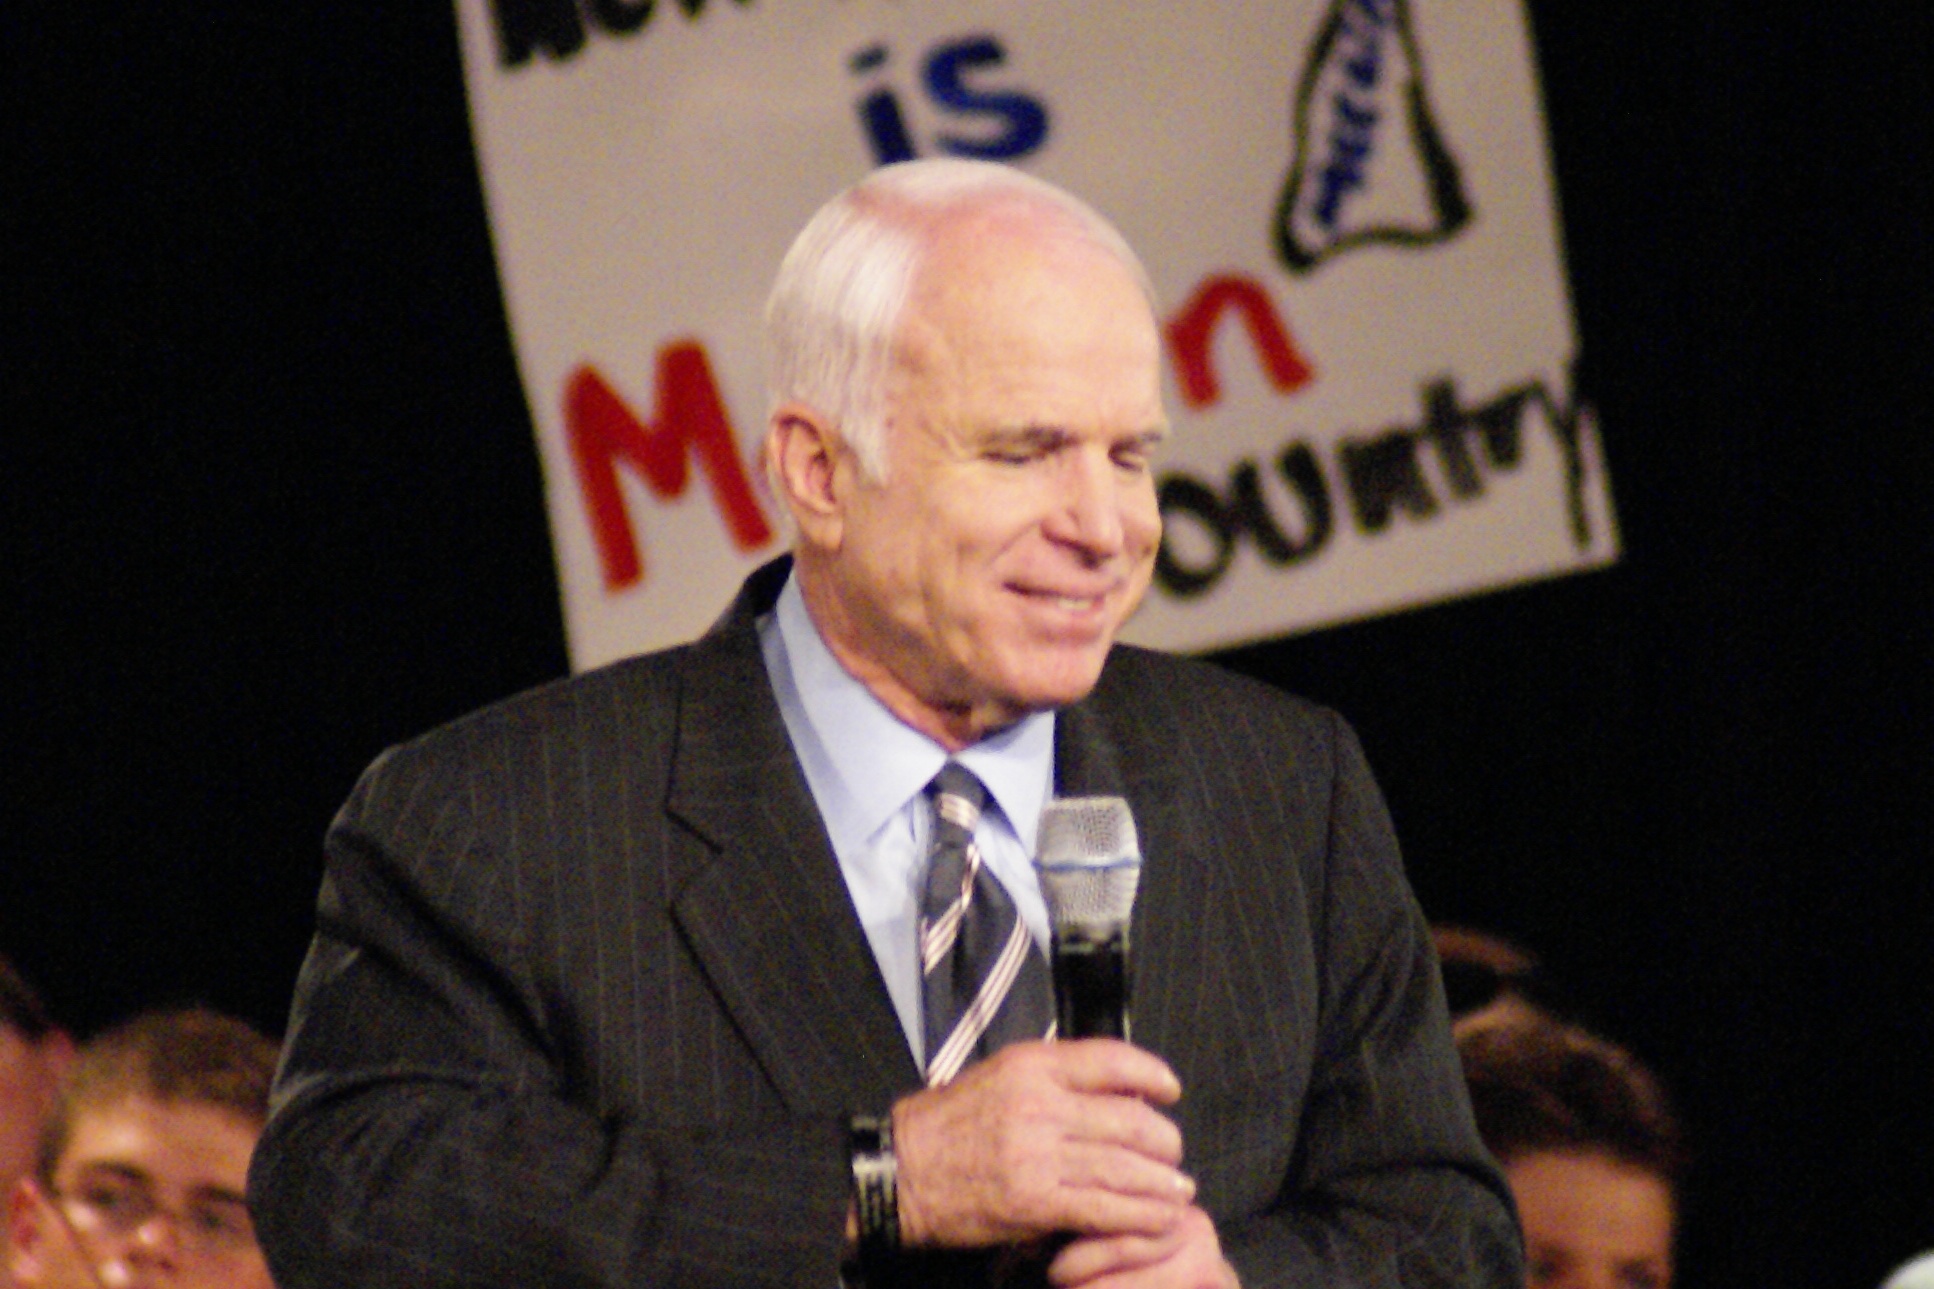 a man in a suit holds a microphone as others sit